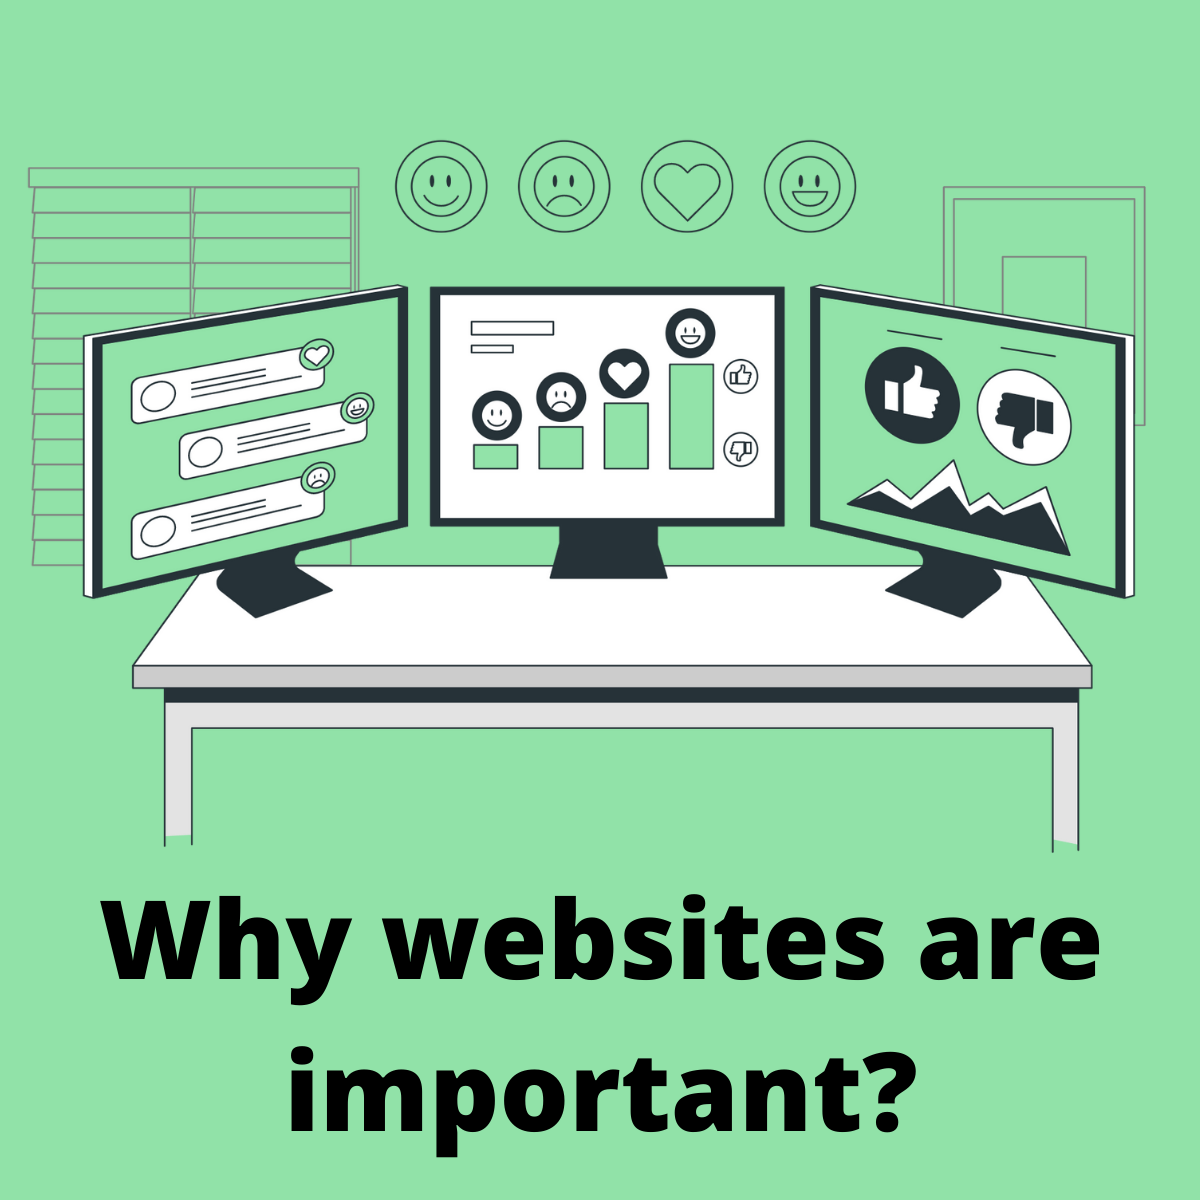 Why websites are important?